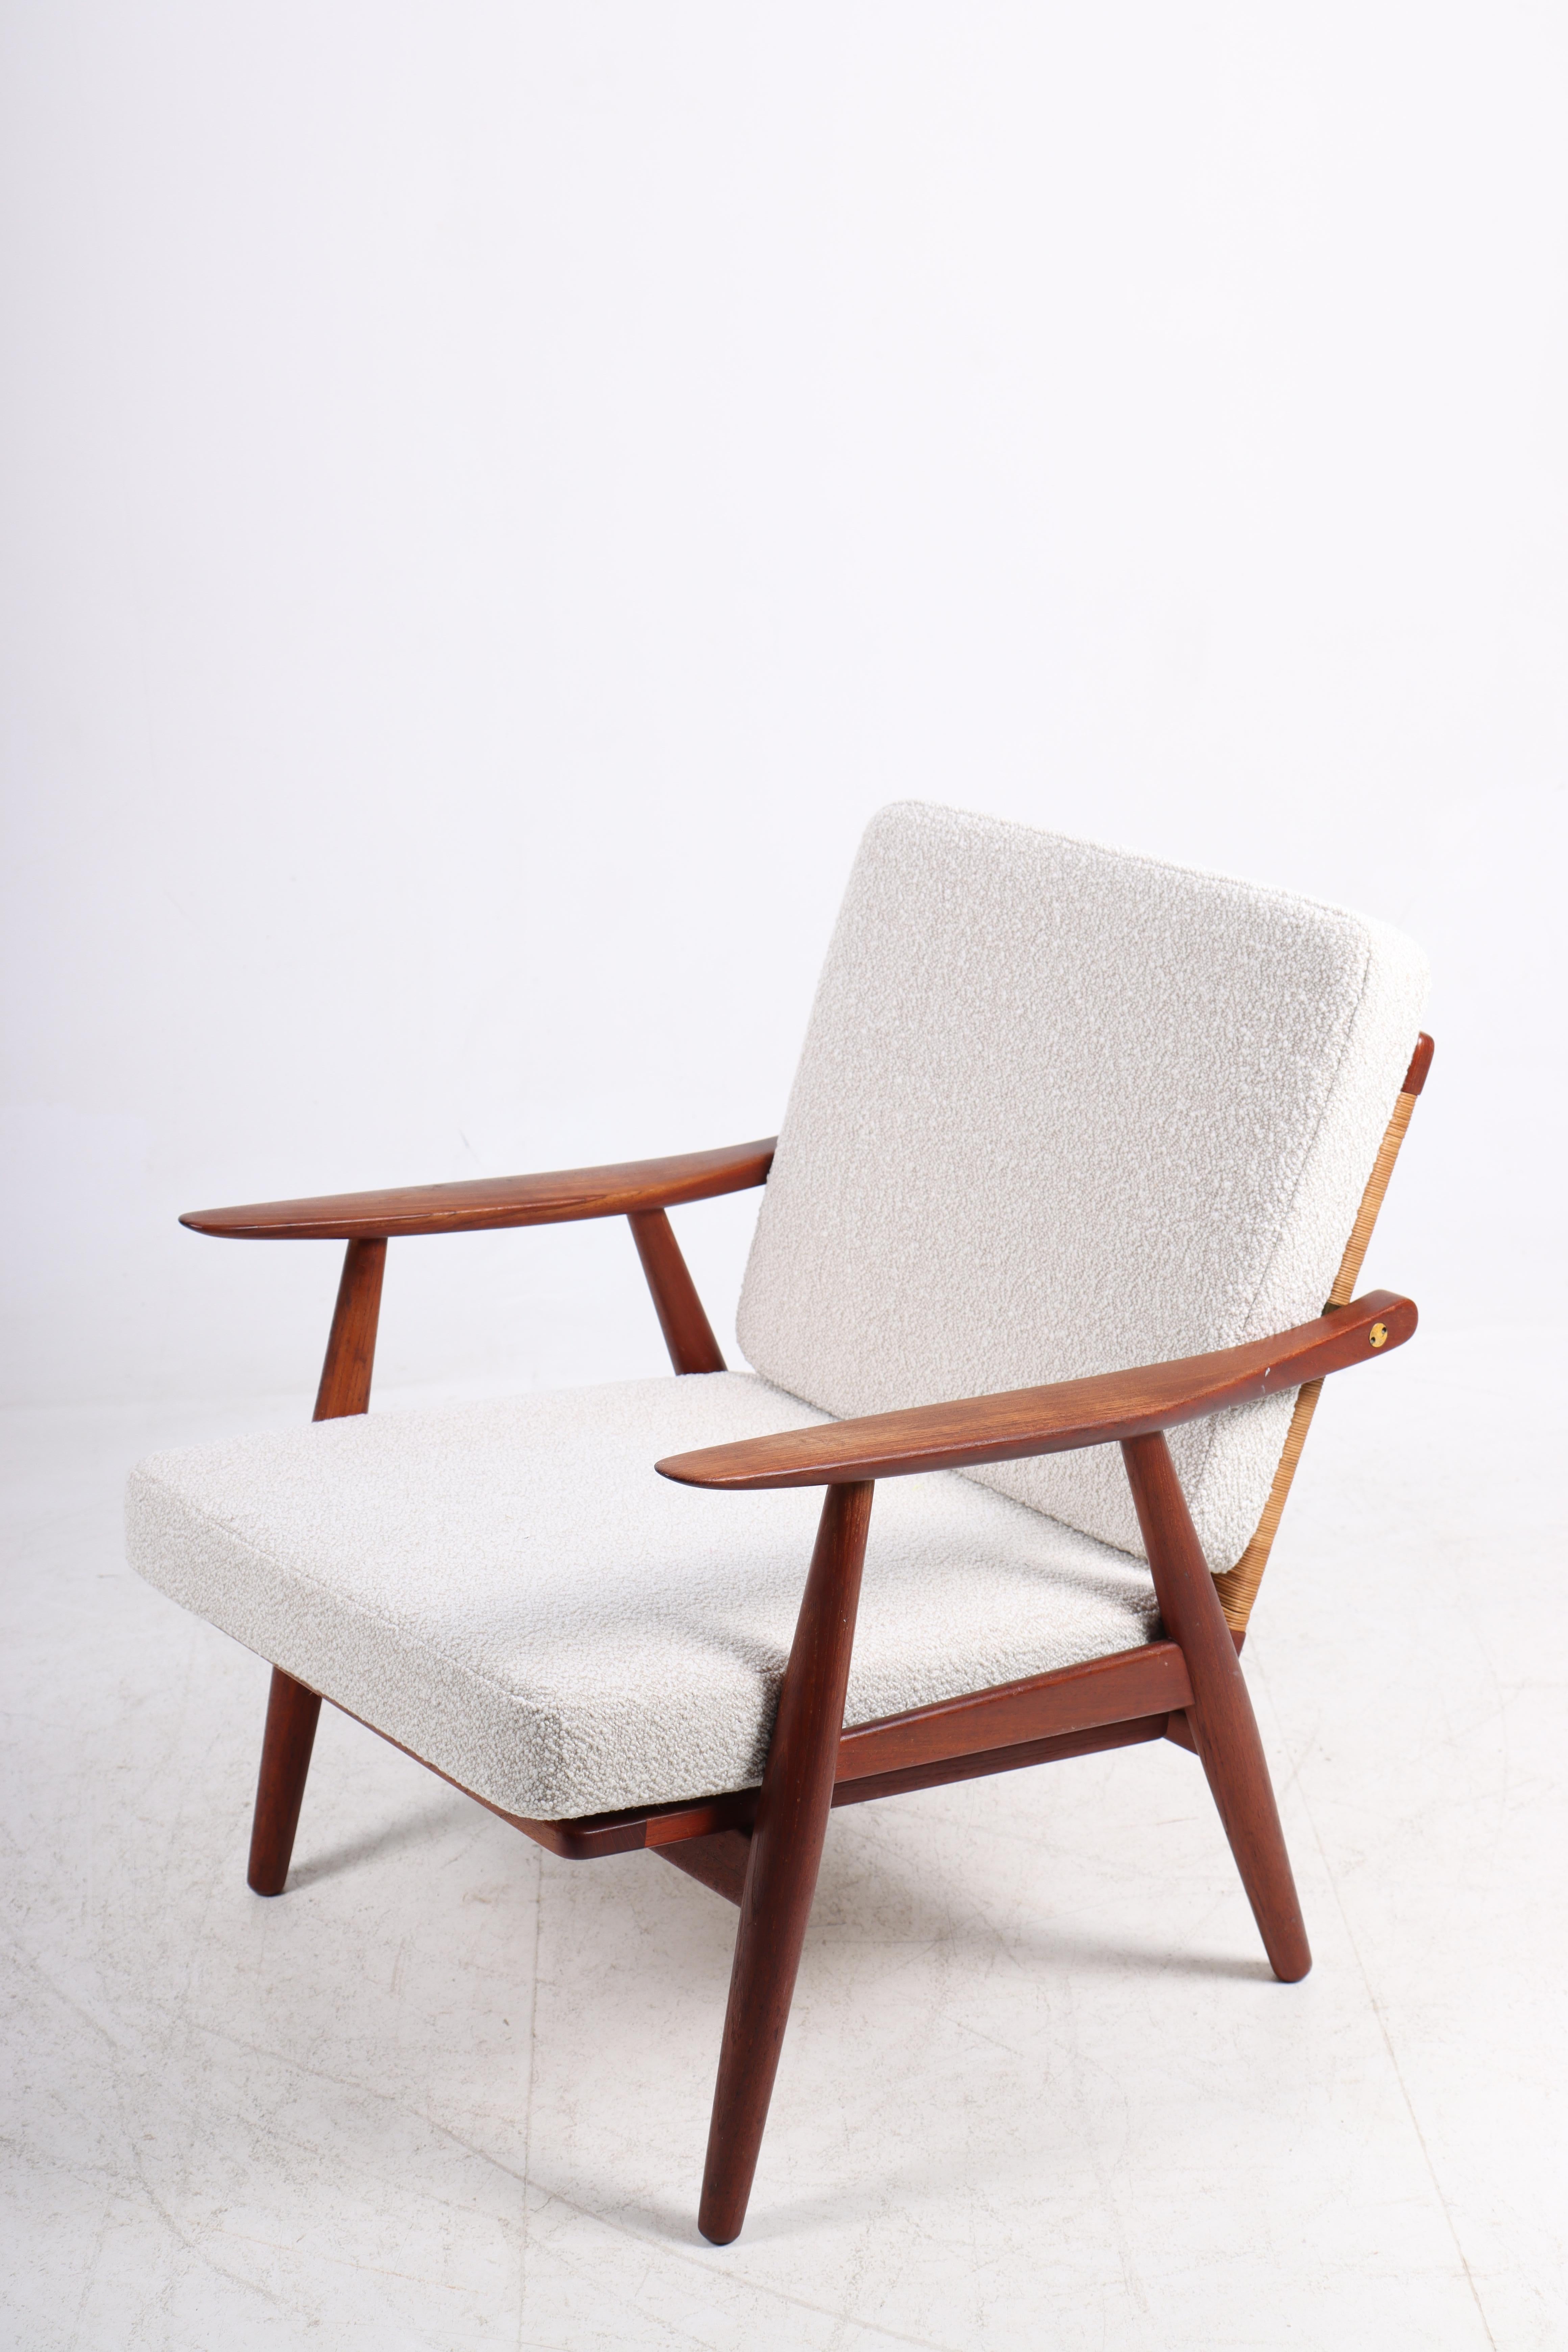 Mid-20th Century Danish Modern Lounge Chair in Teak and Cane by Hans Wegner by GETAMA, 1950